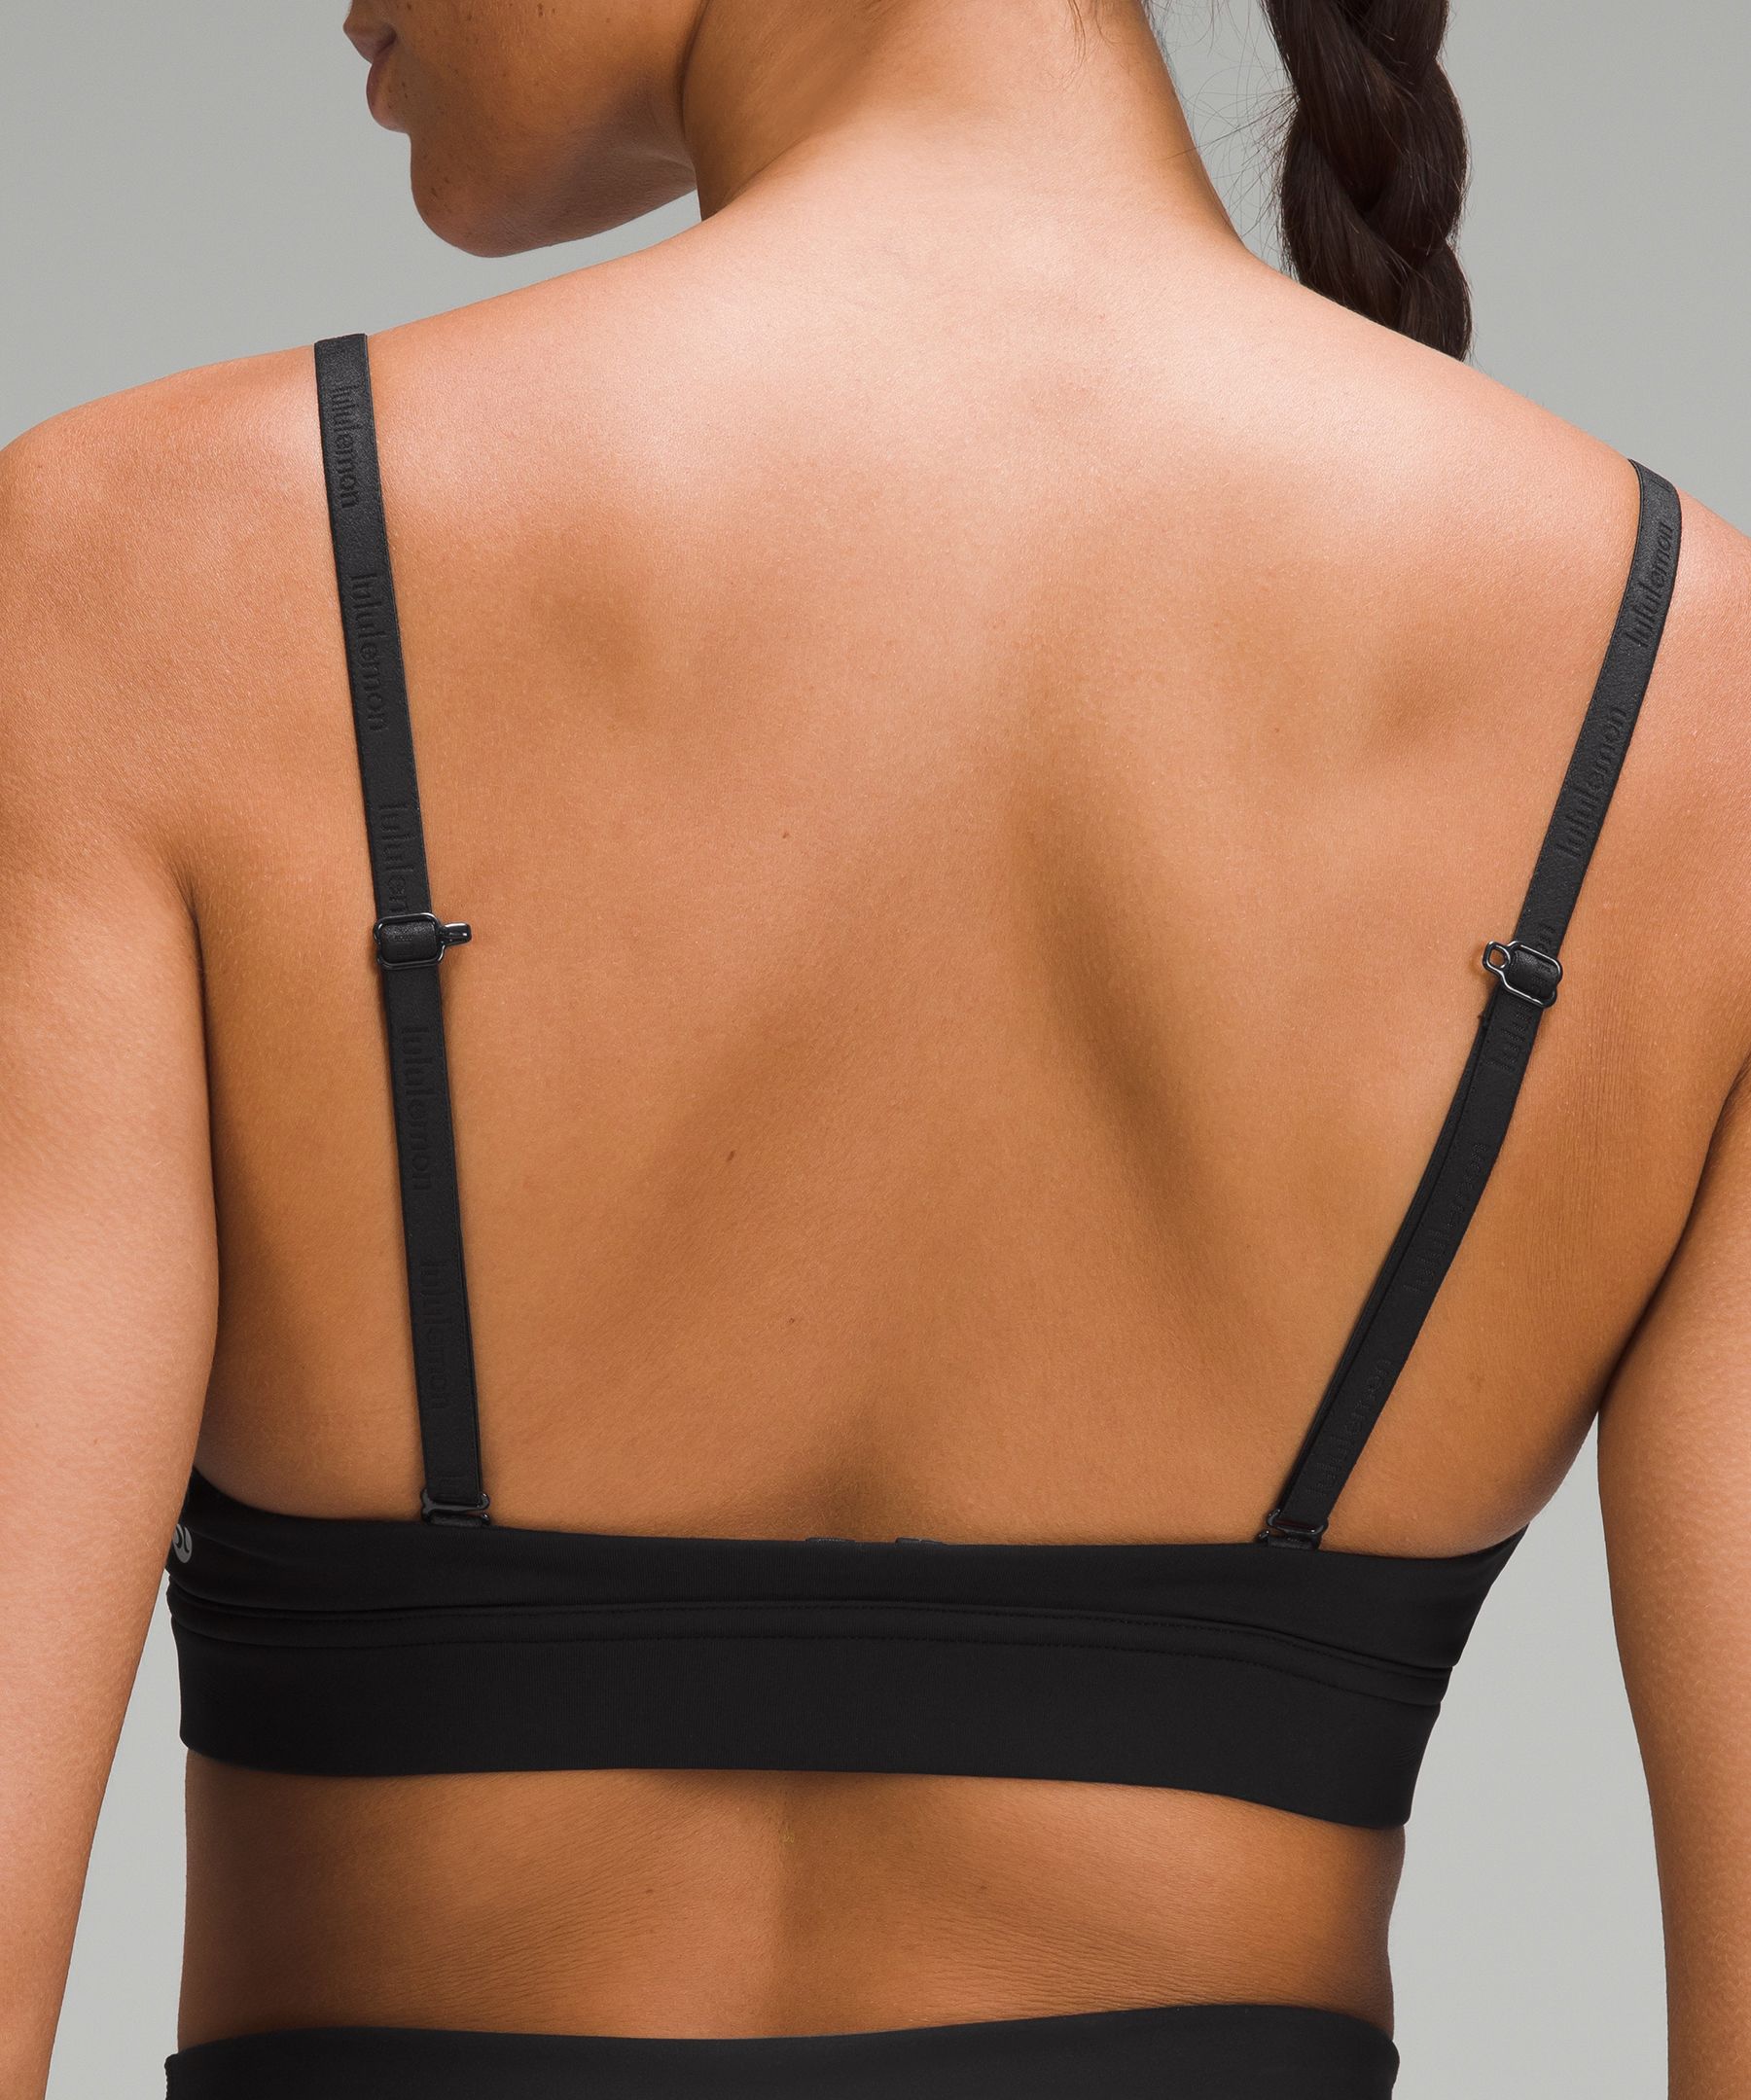 Lululemon athletica License to Train Triangle Bra Light Support, A/B Cup  *Logo, Women's Bras